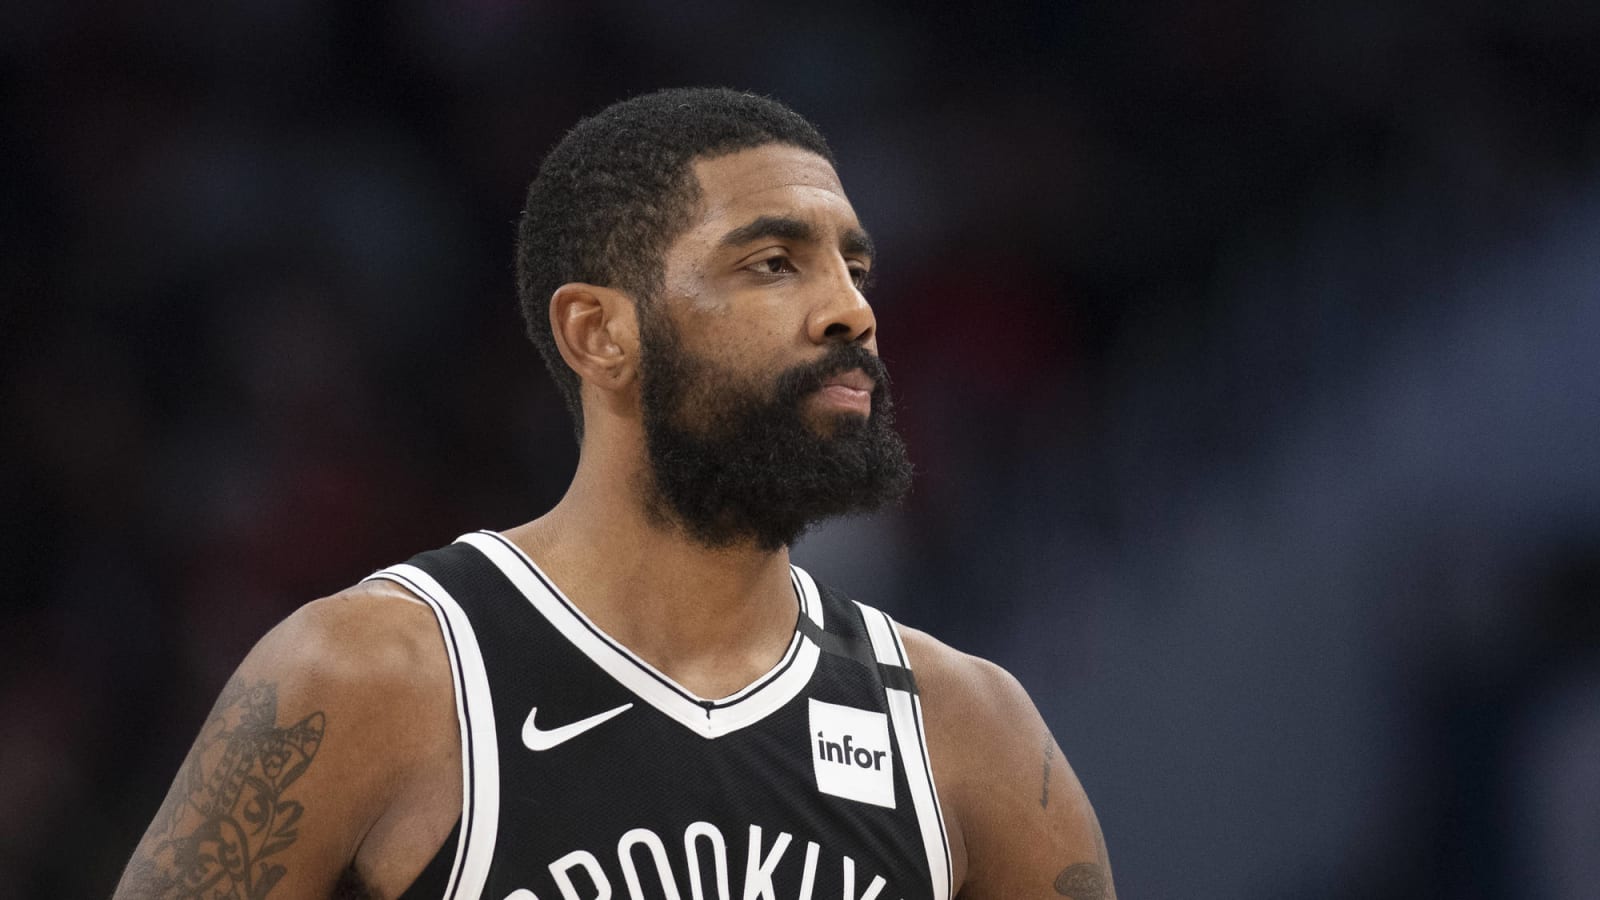 Report: Kyrie Irving proposed NBA players start their own league